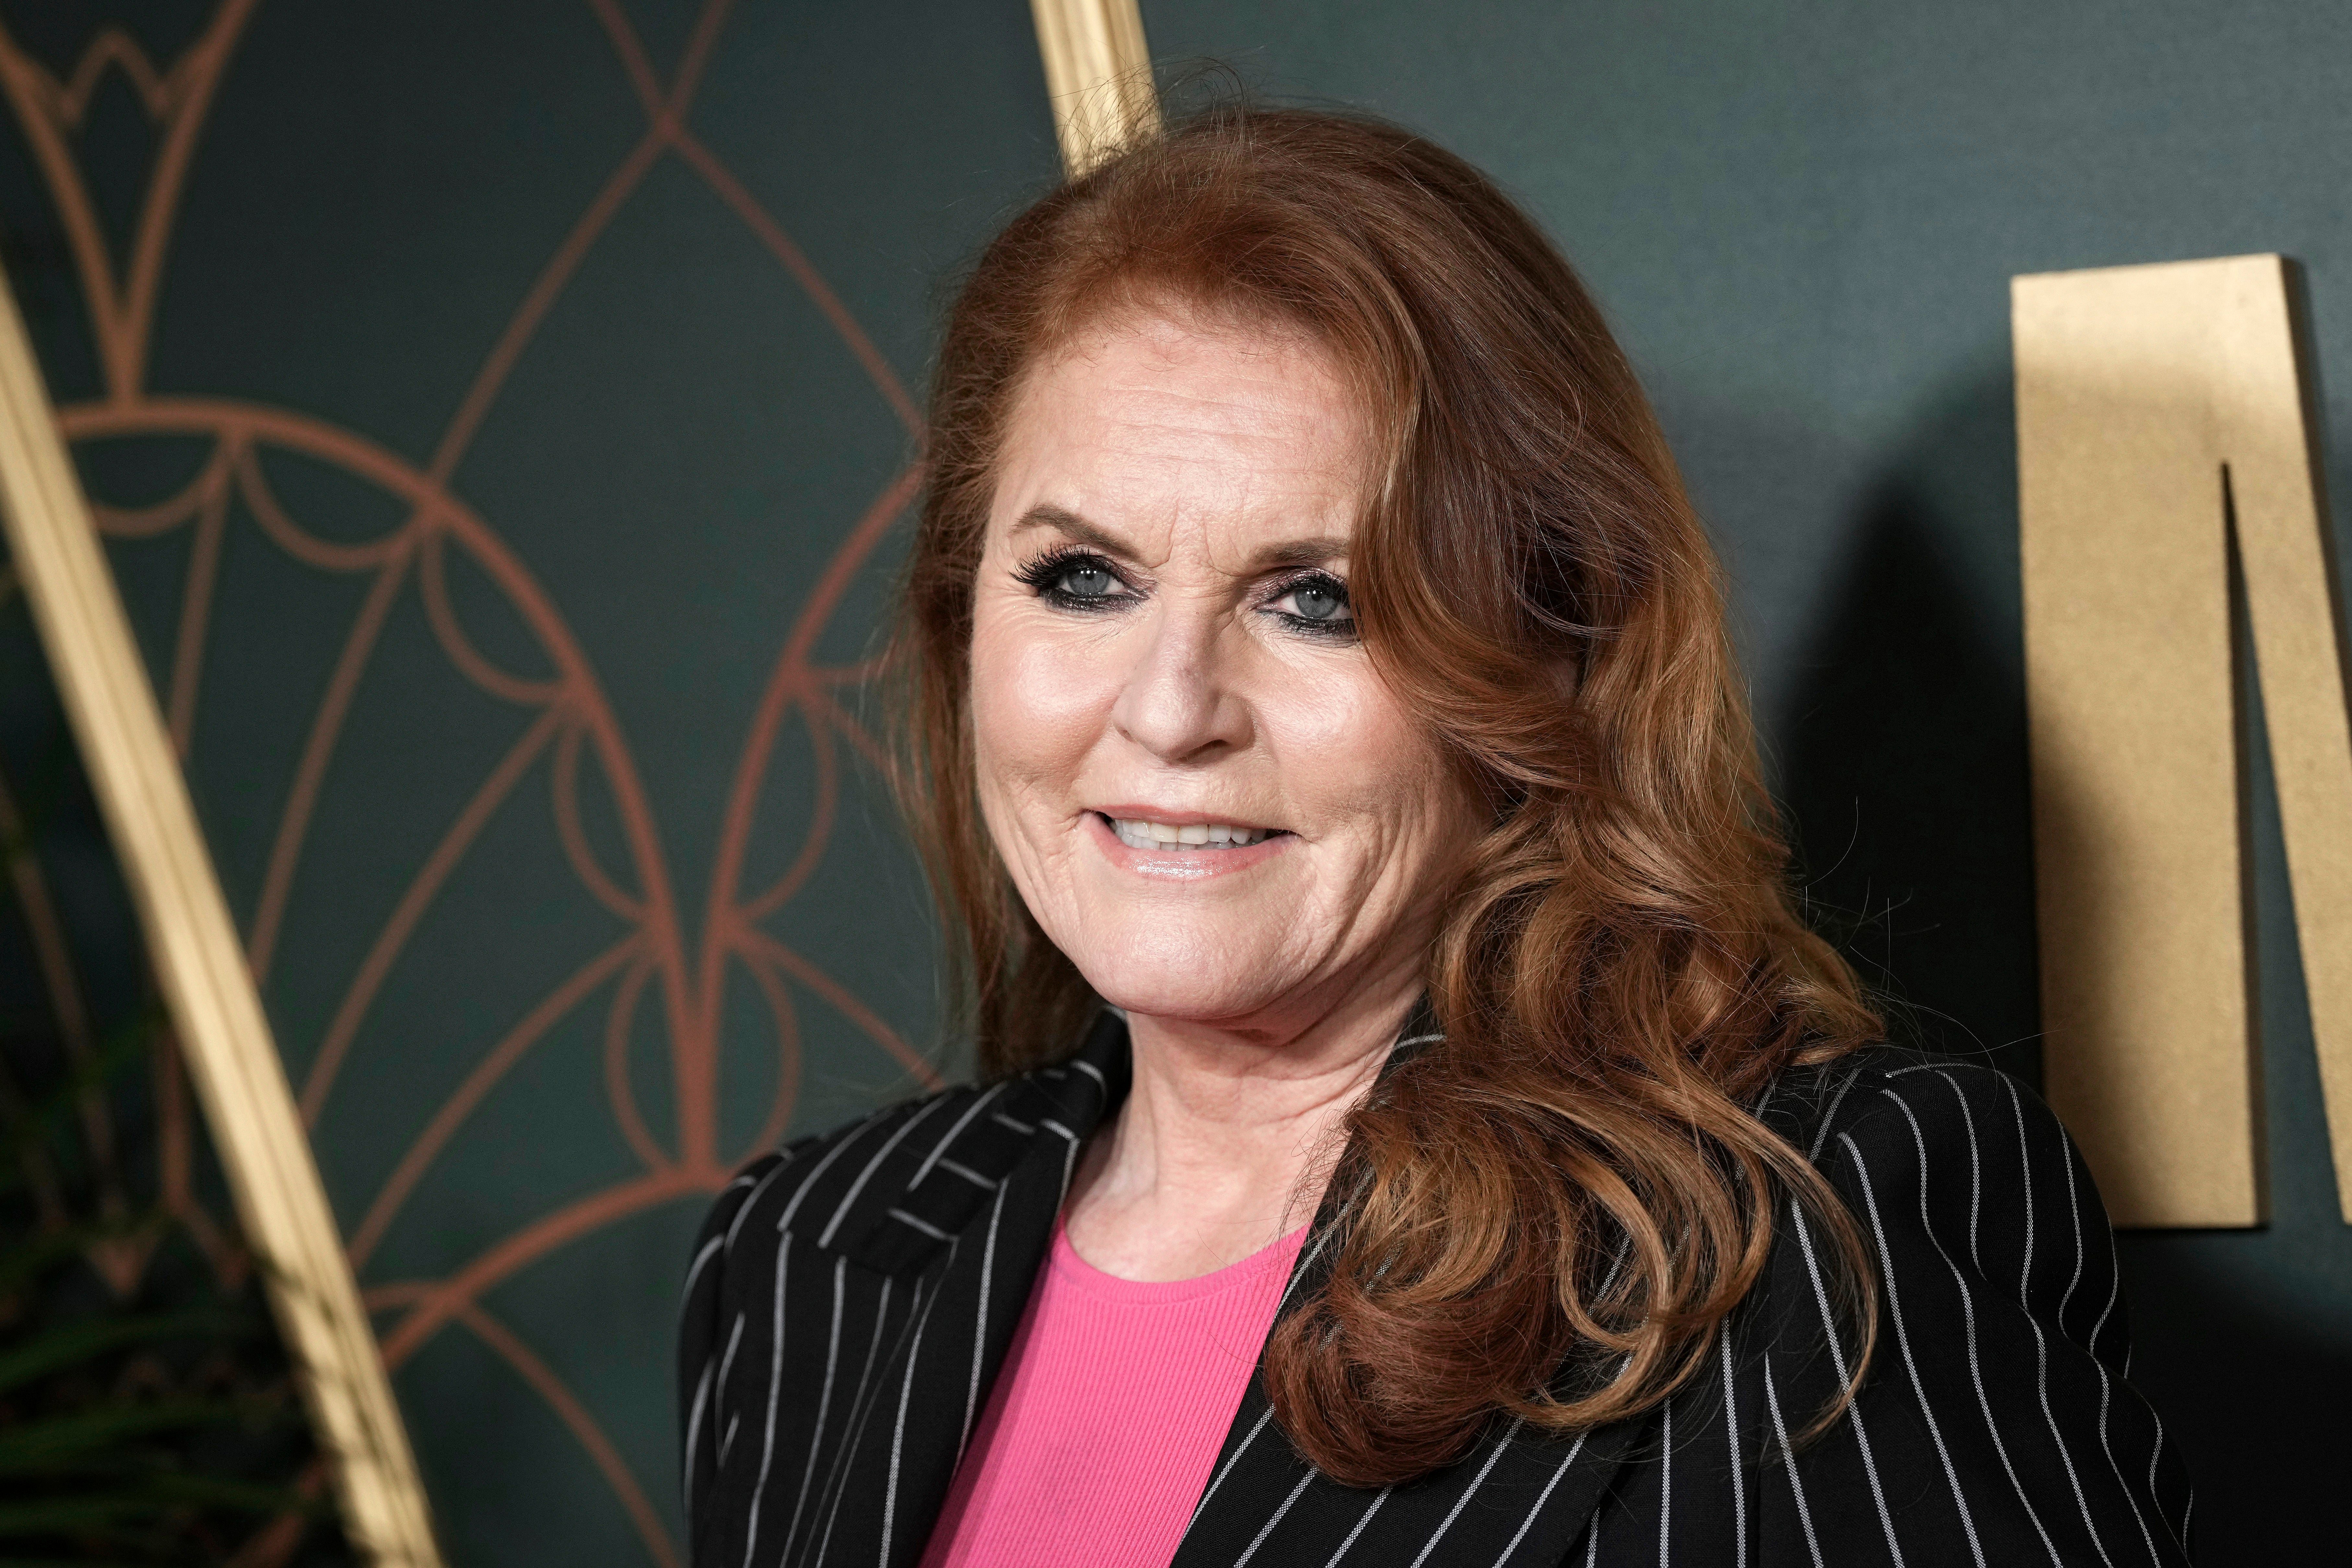 Sarah Ferguson has been diagnosed with a form of skin cancer